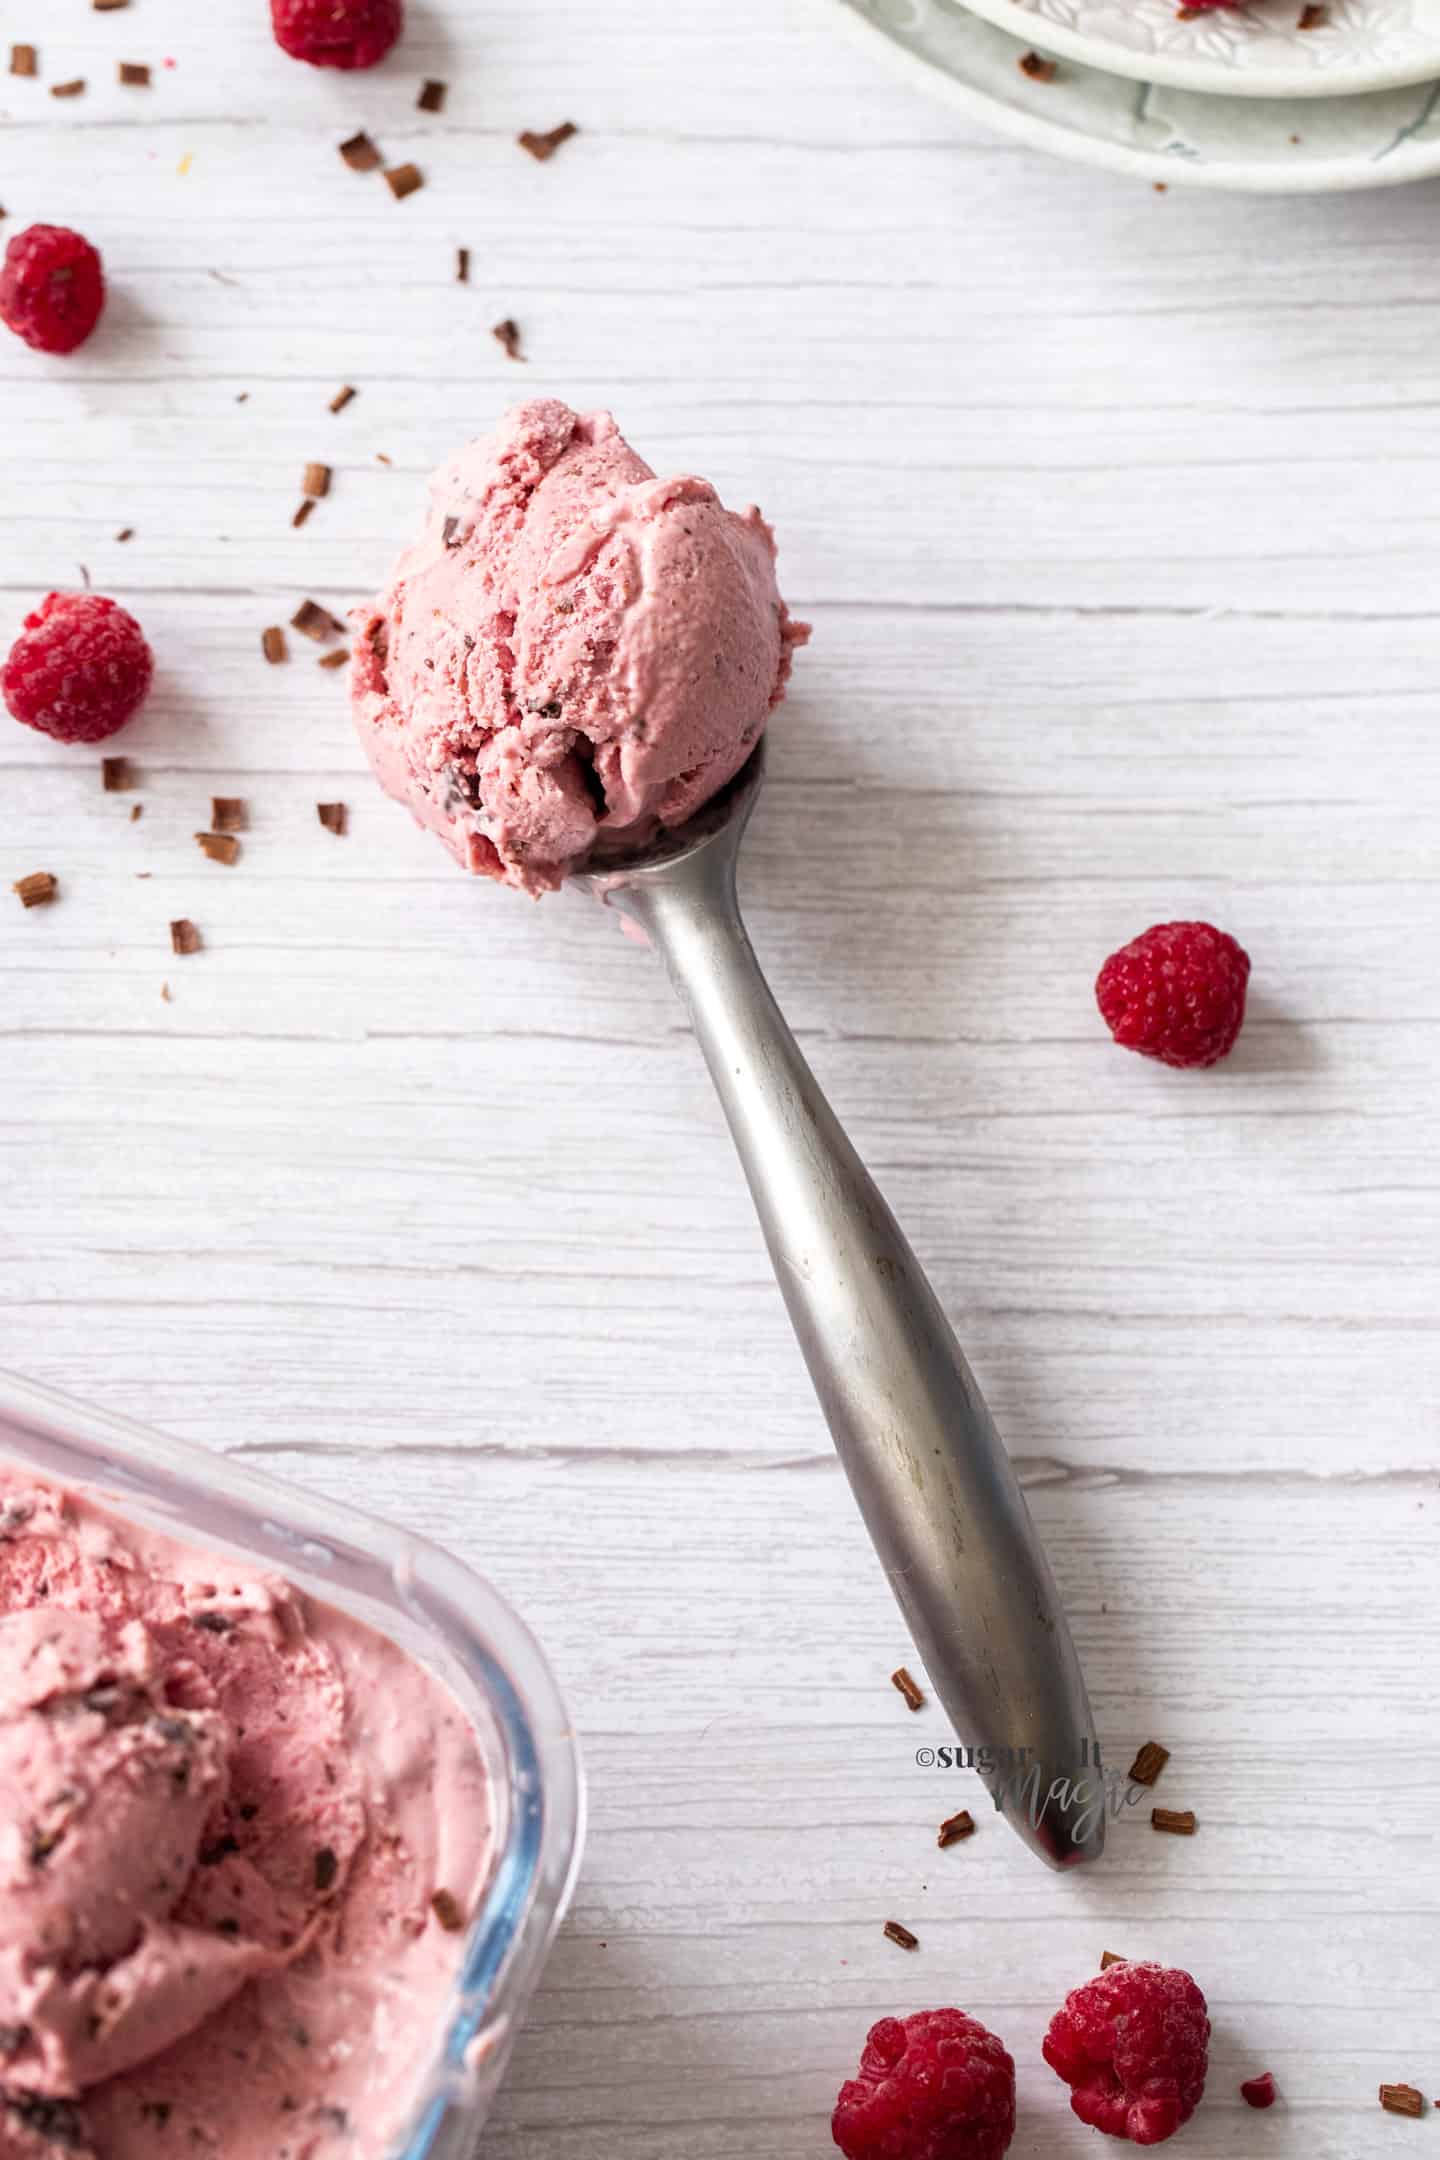 A silver ice cream scoop filled with scoop of raspberry ice cream.